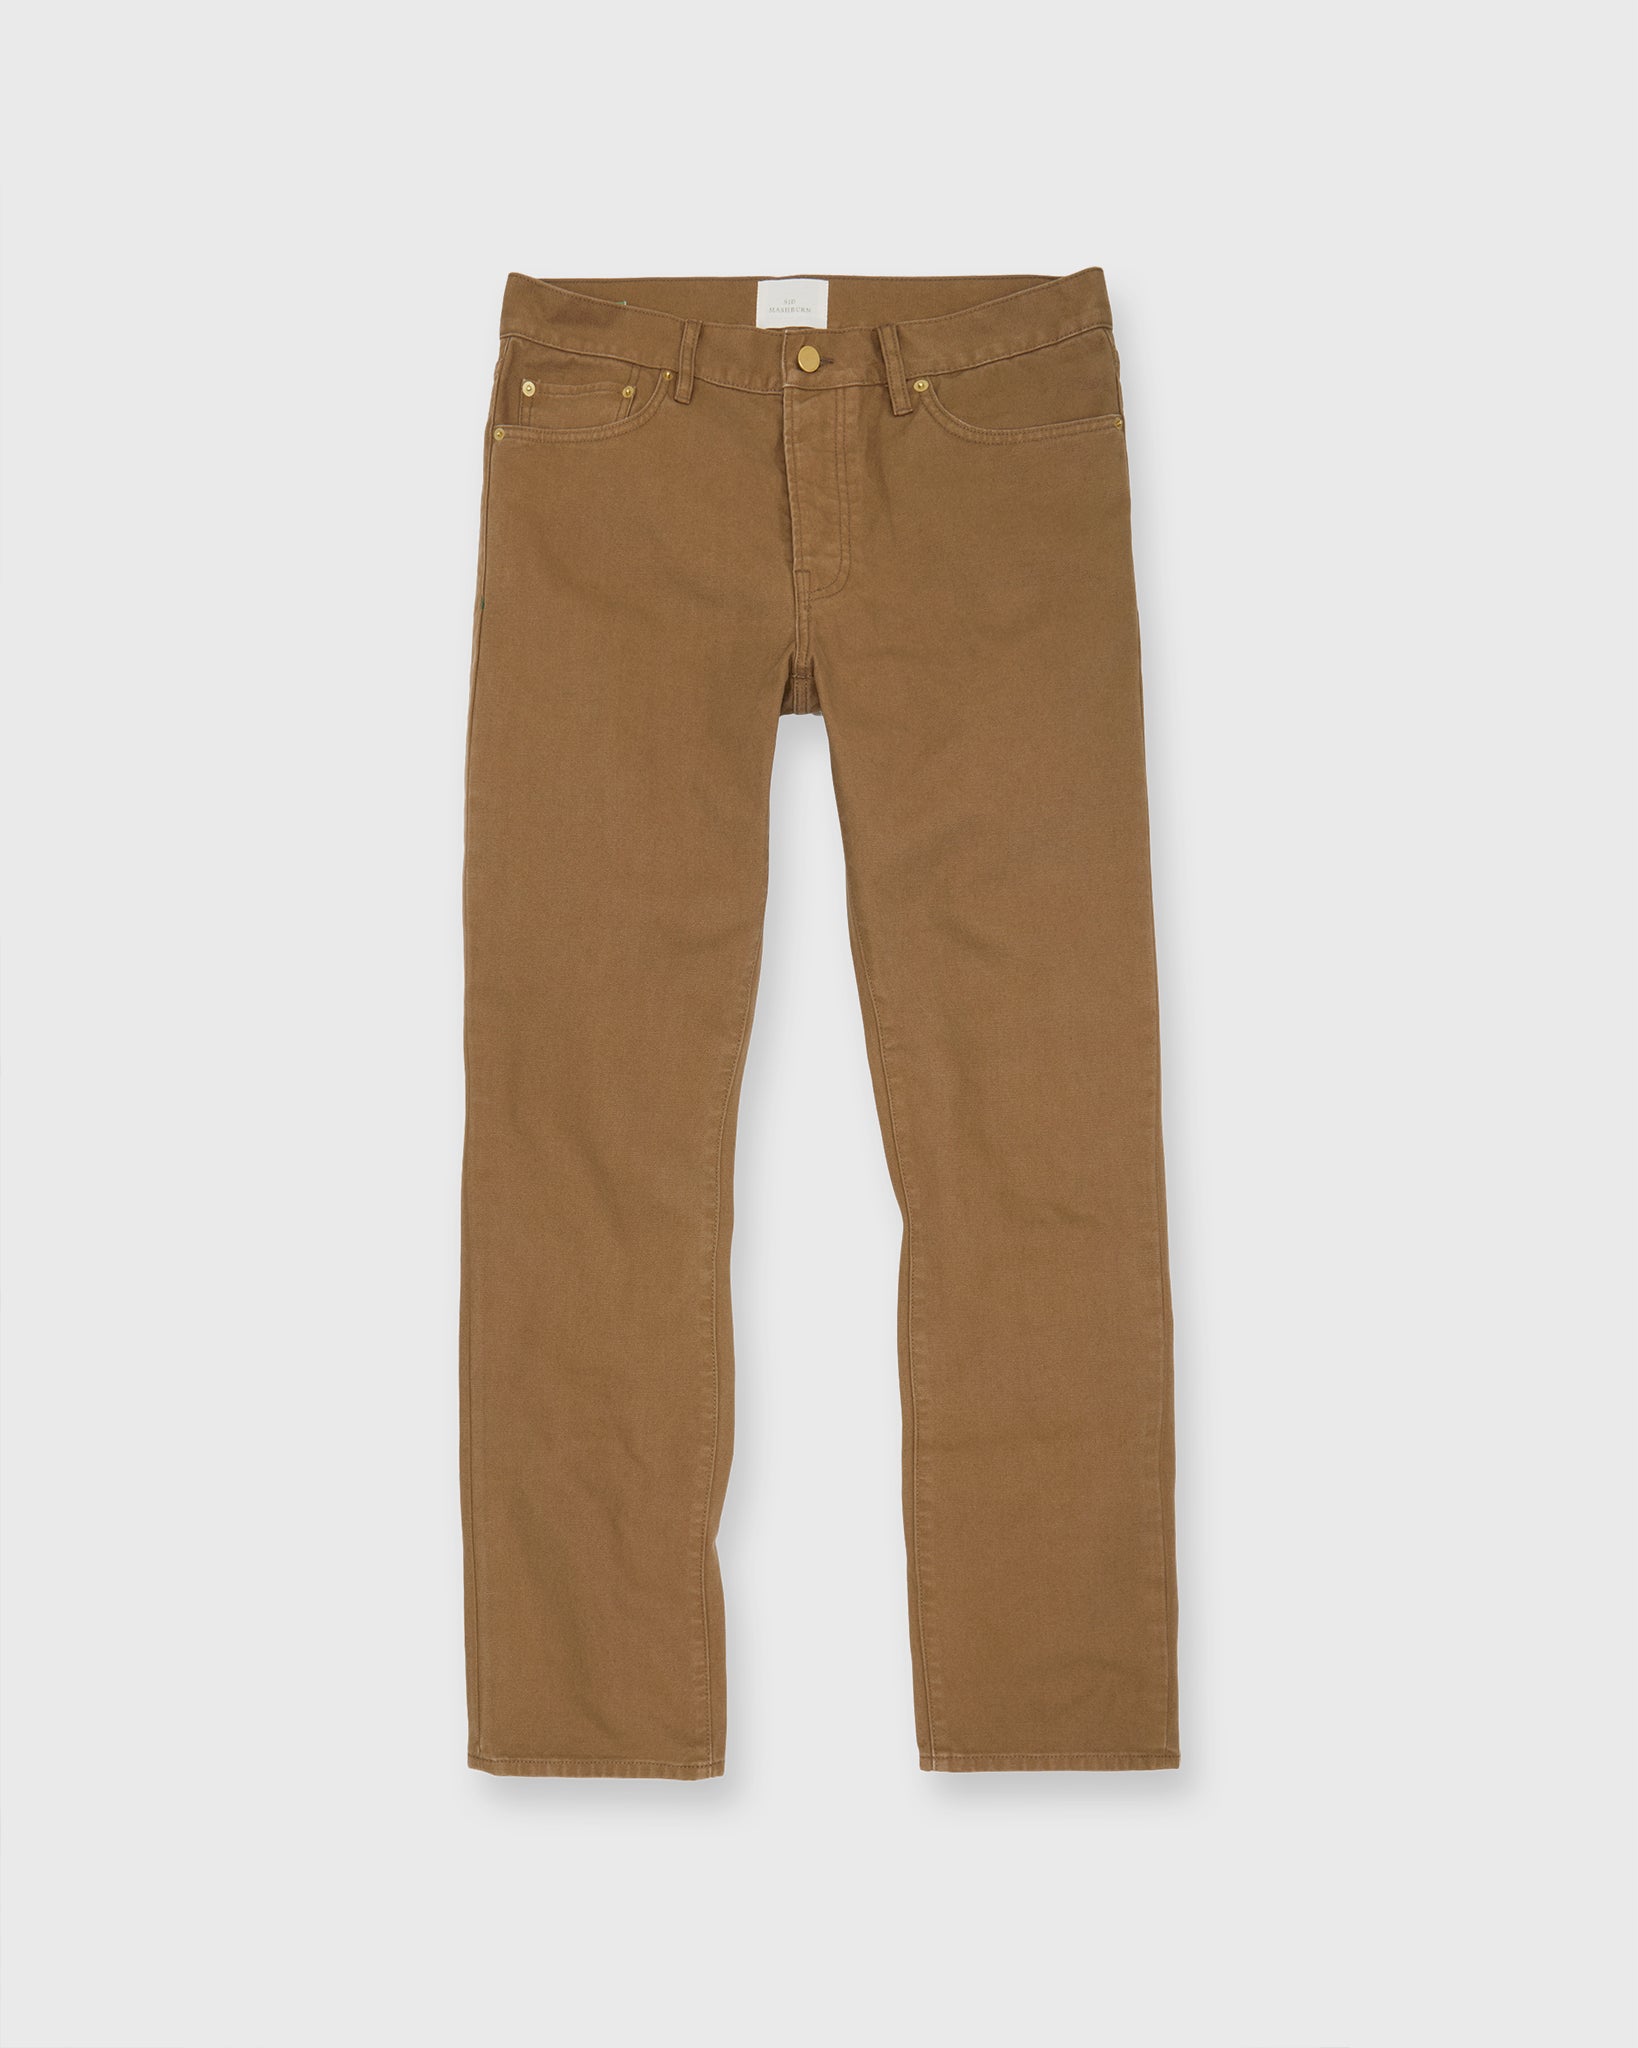 Slim Straight 5-Pocket Pant in Tobacco Canvas